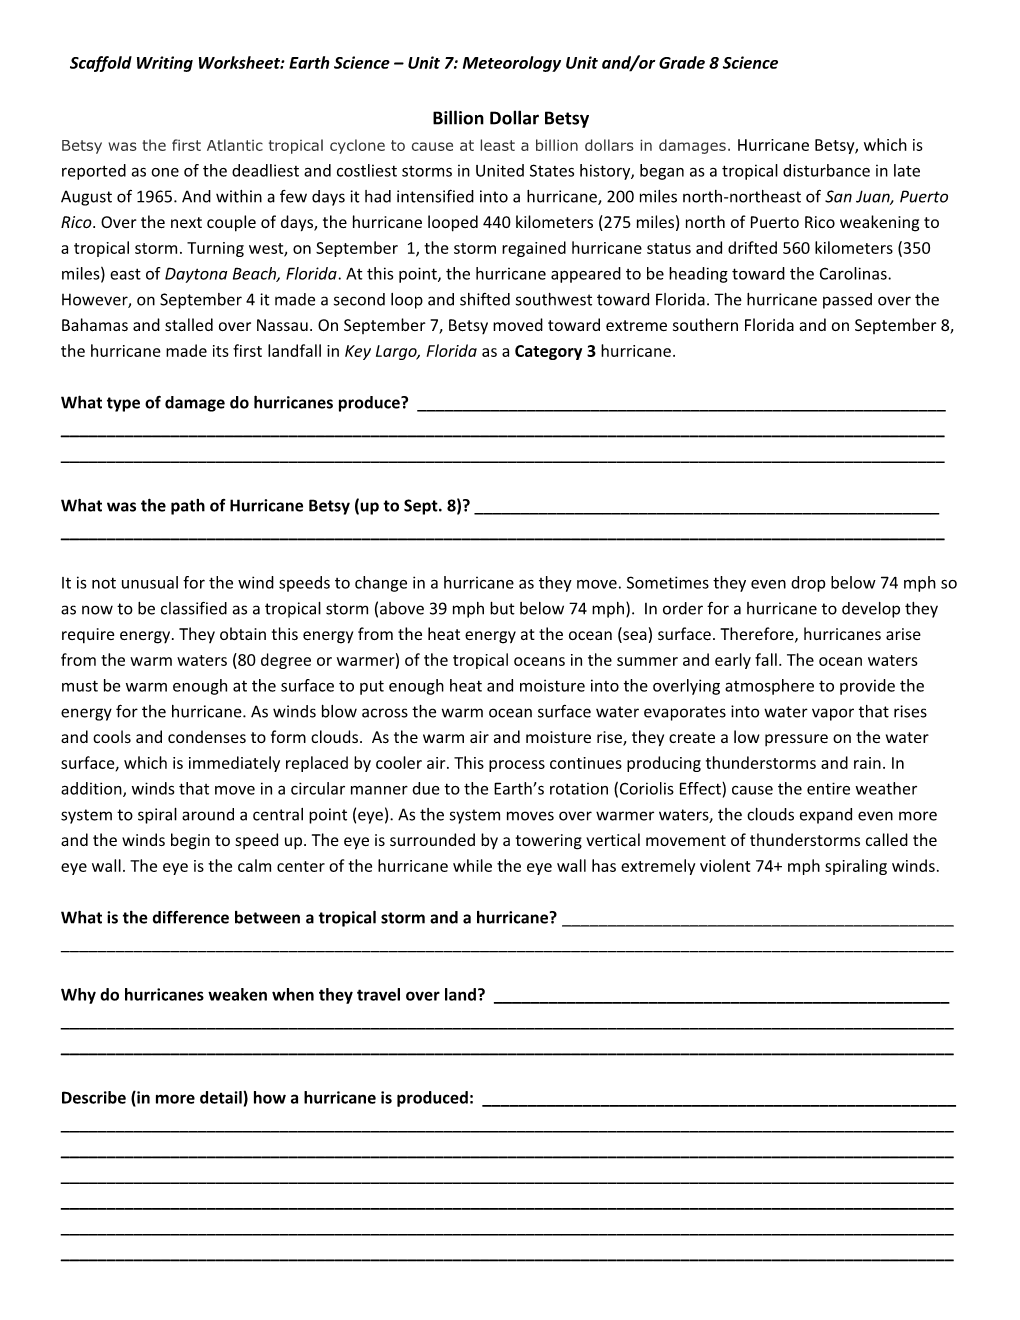 Scaffold Writing Worksheet: Earth Science Unit 7: Meteorology Unit And/Or Grade 8 Science